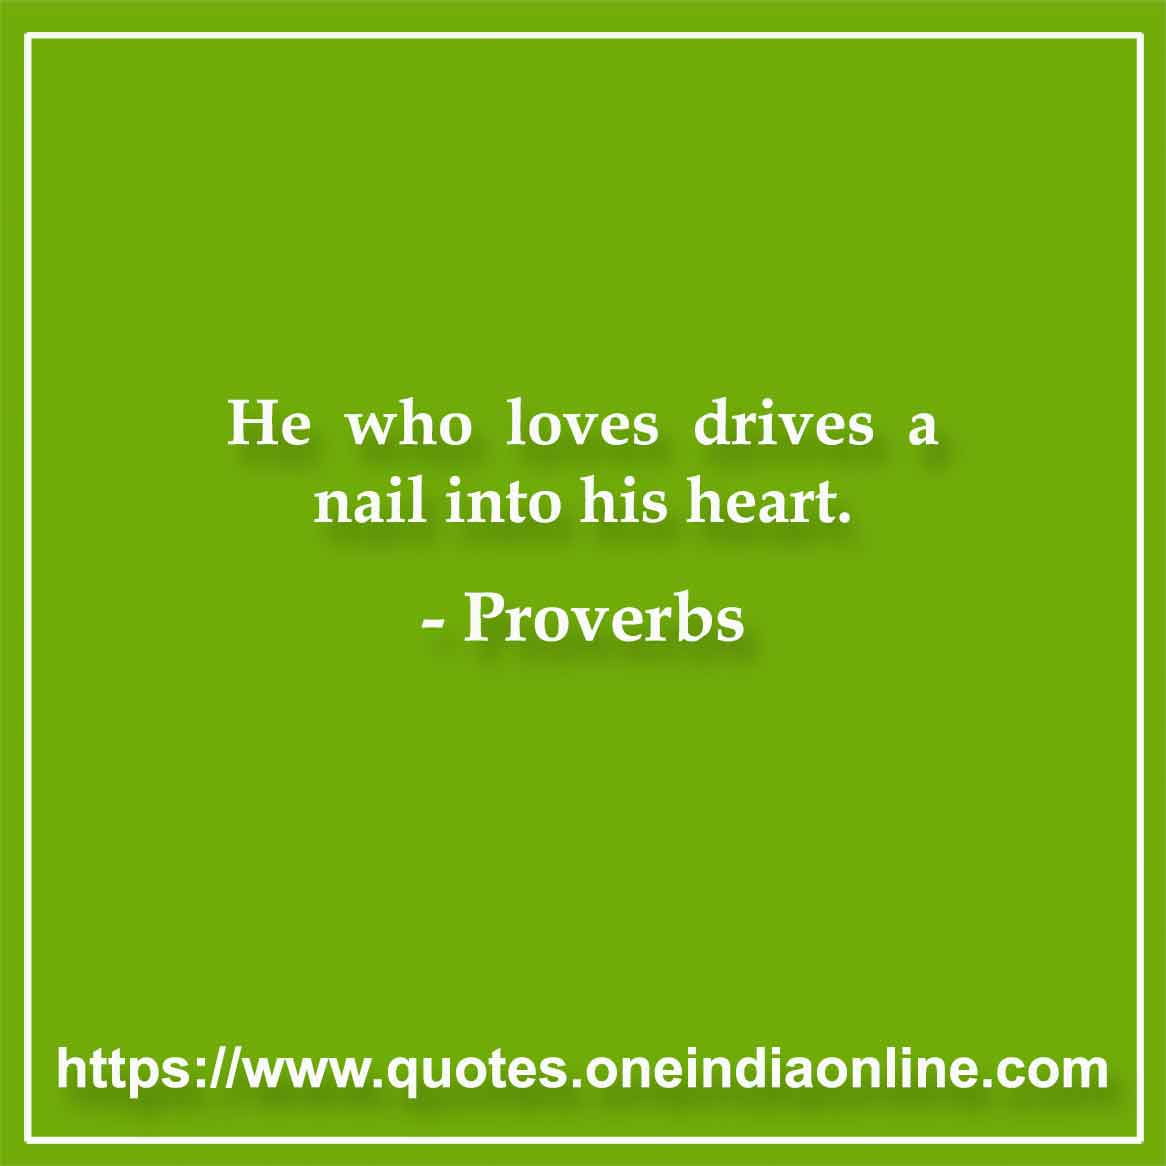 He who loves drives a nail into his heart.

